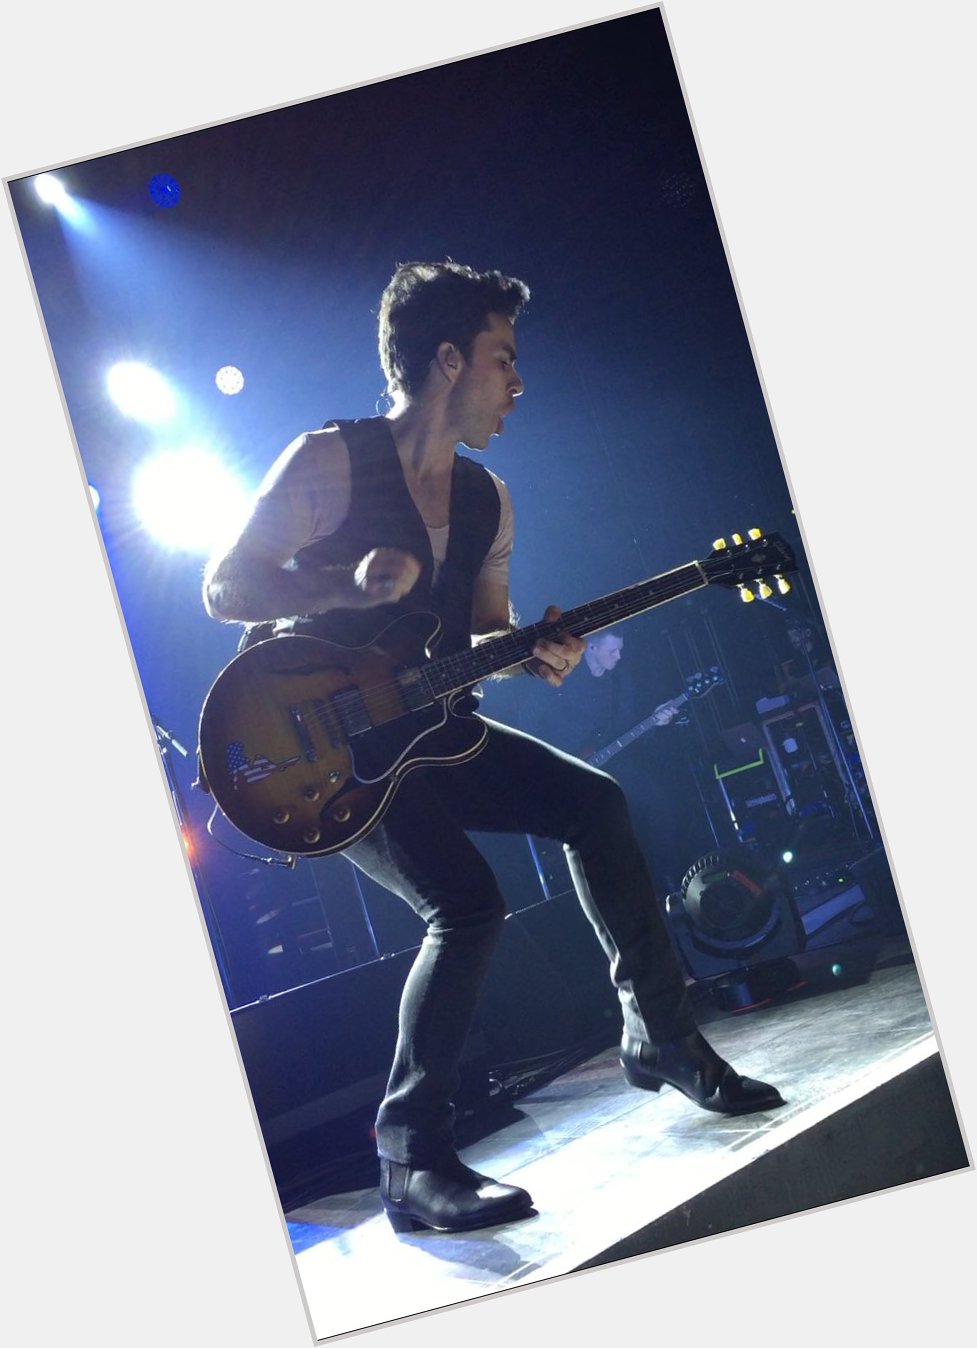  Happy birthday to the one and only Mr Kelly Jones!   You re a legend!  Keep on rocking!   